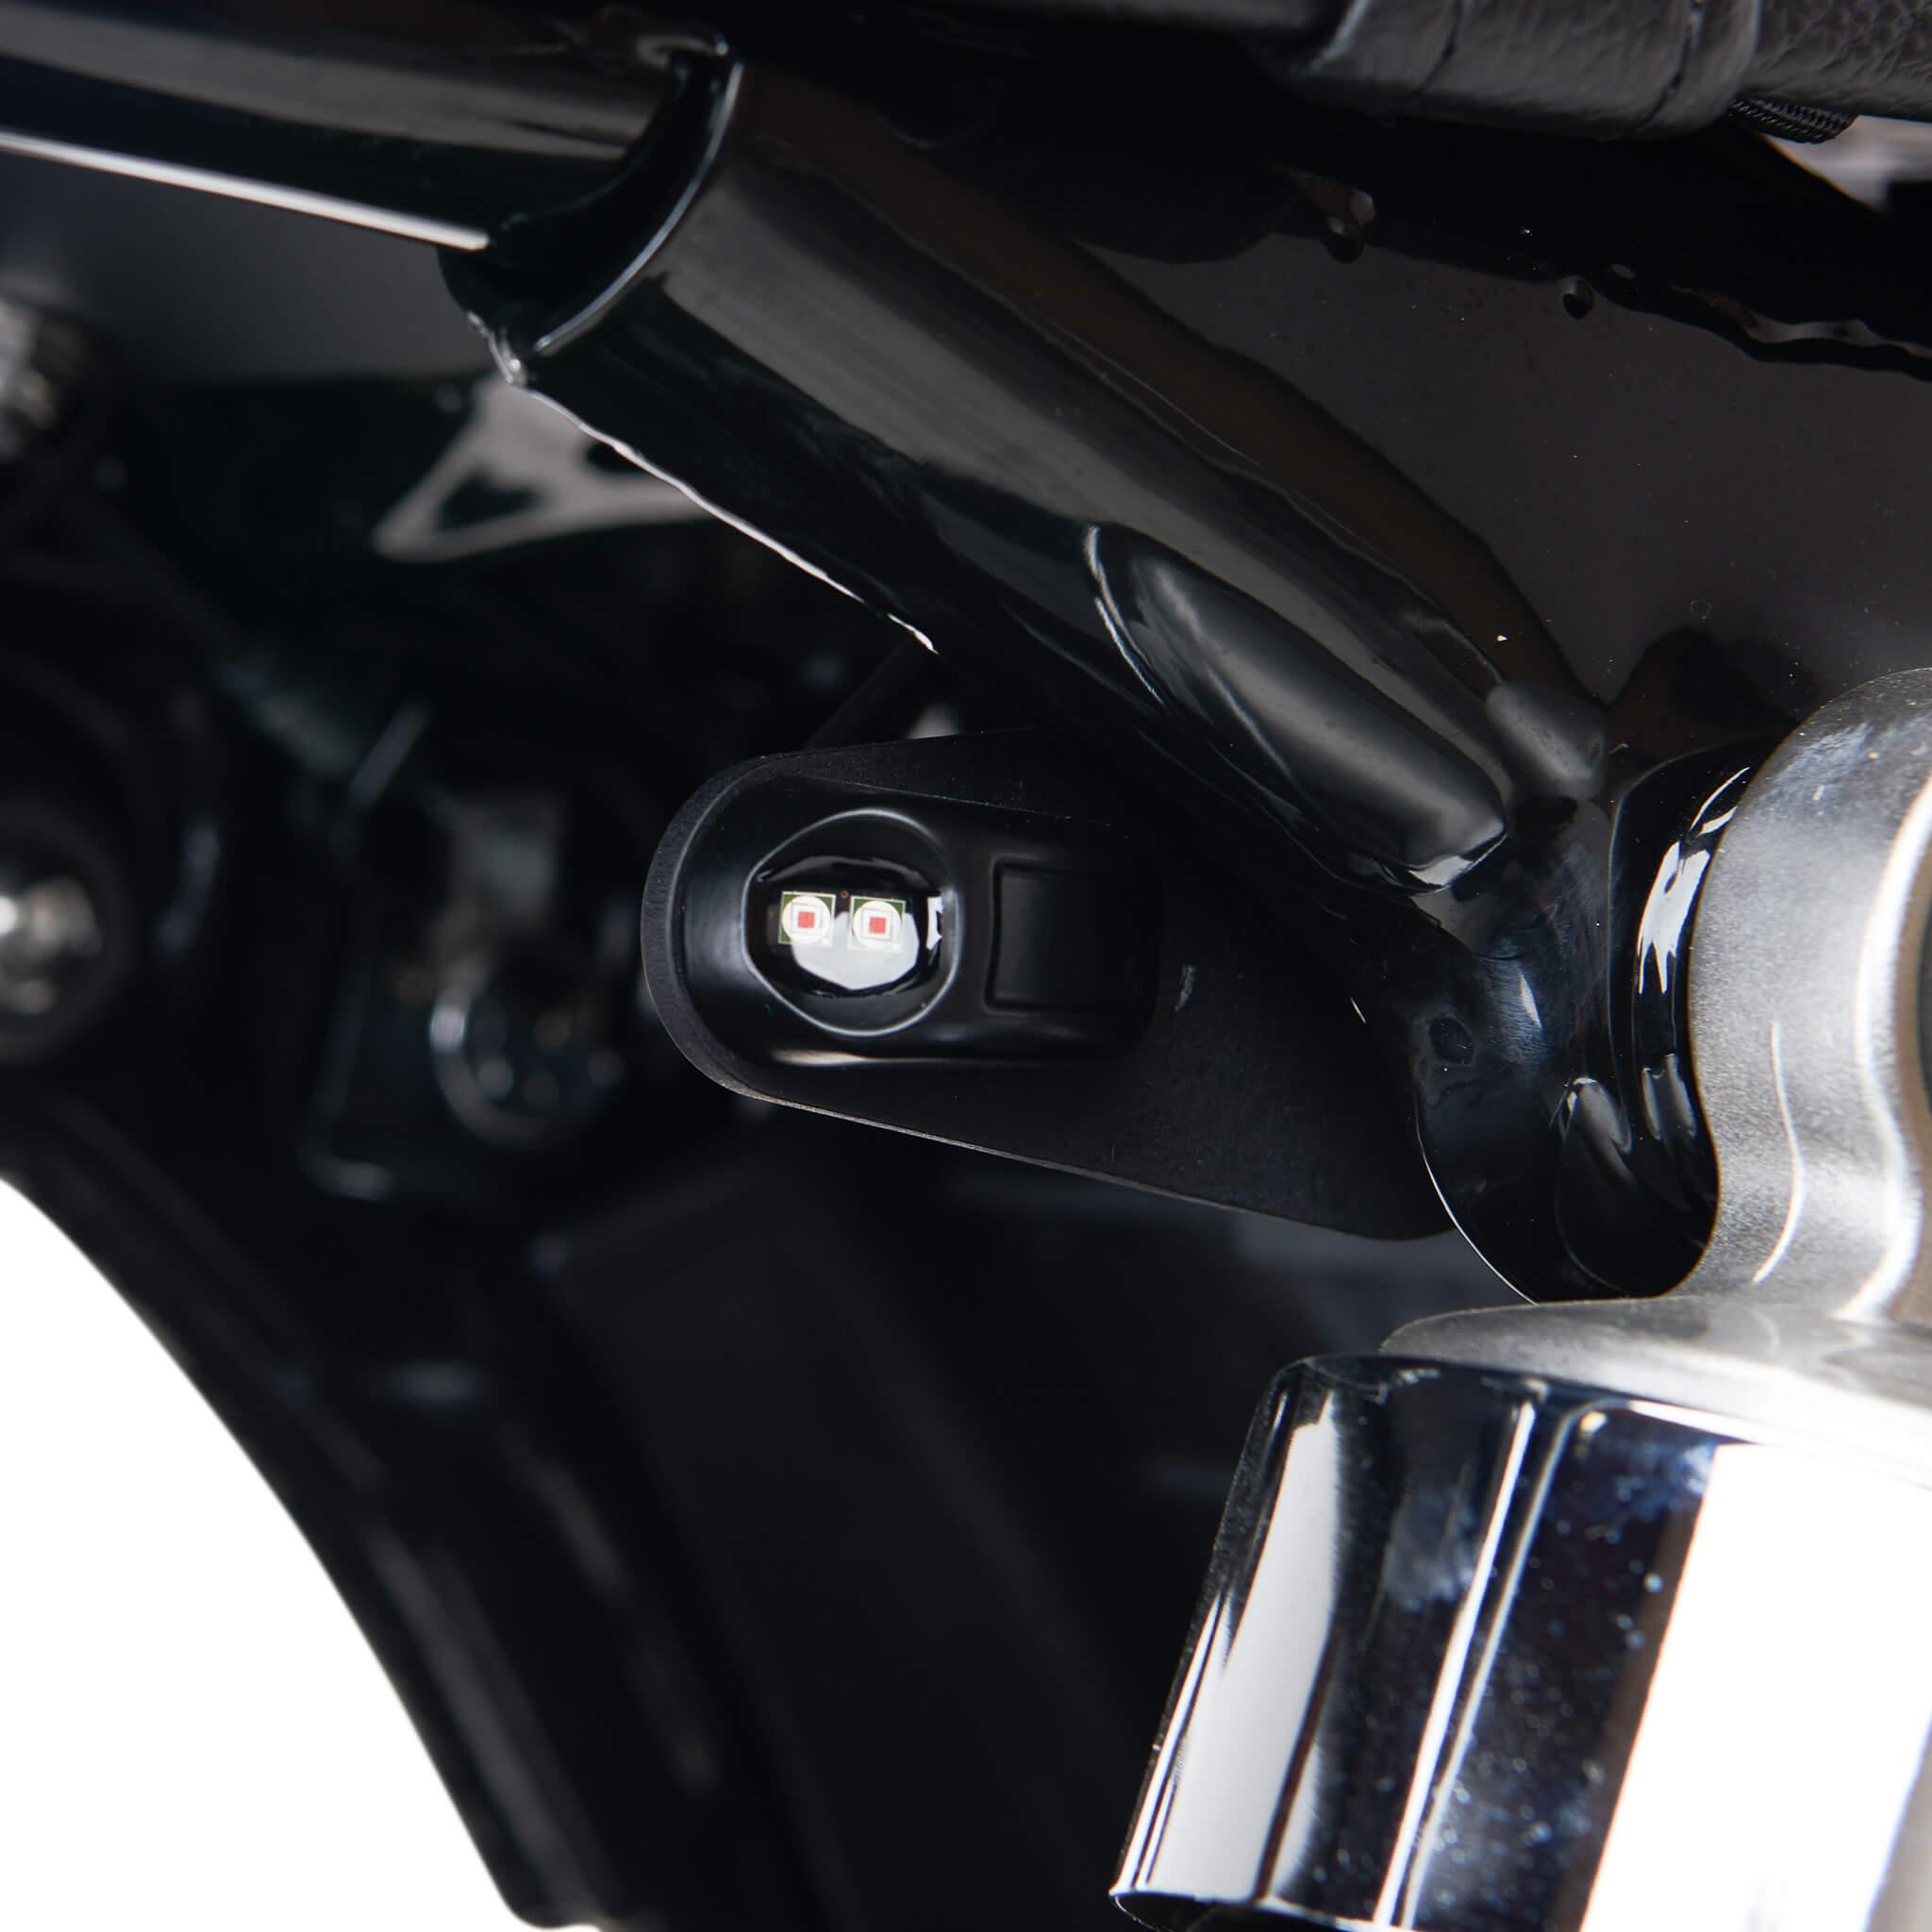 Shock Mount Turn Signal Adapters for Triumph Motorcycles - British Customs